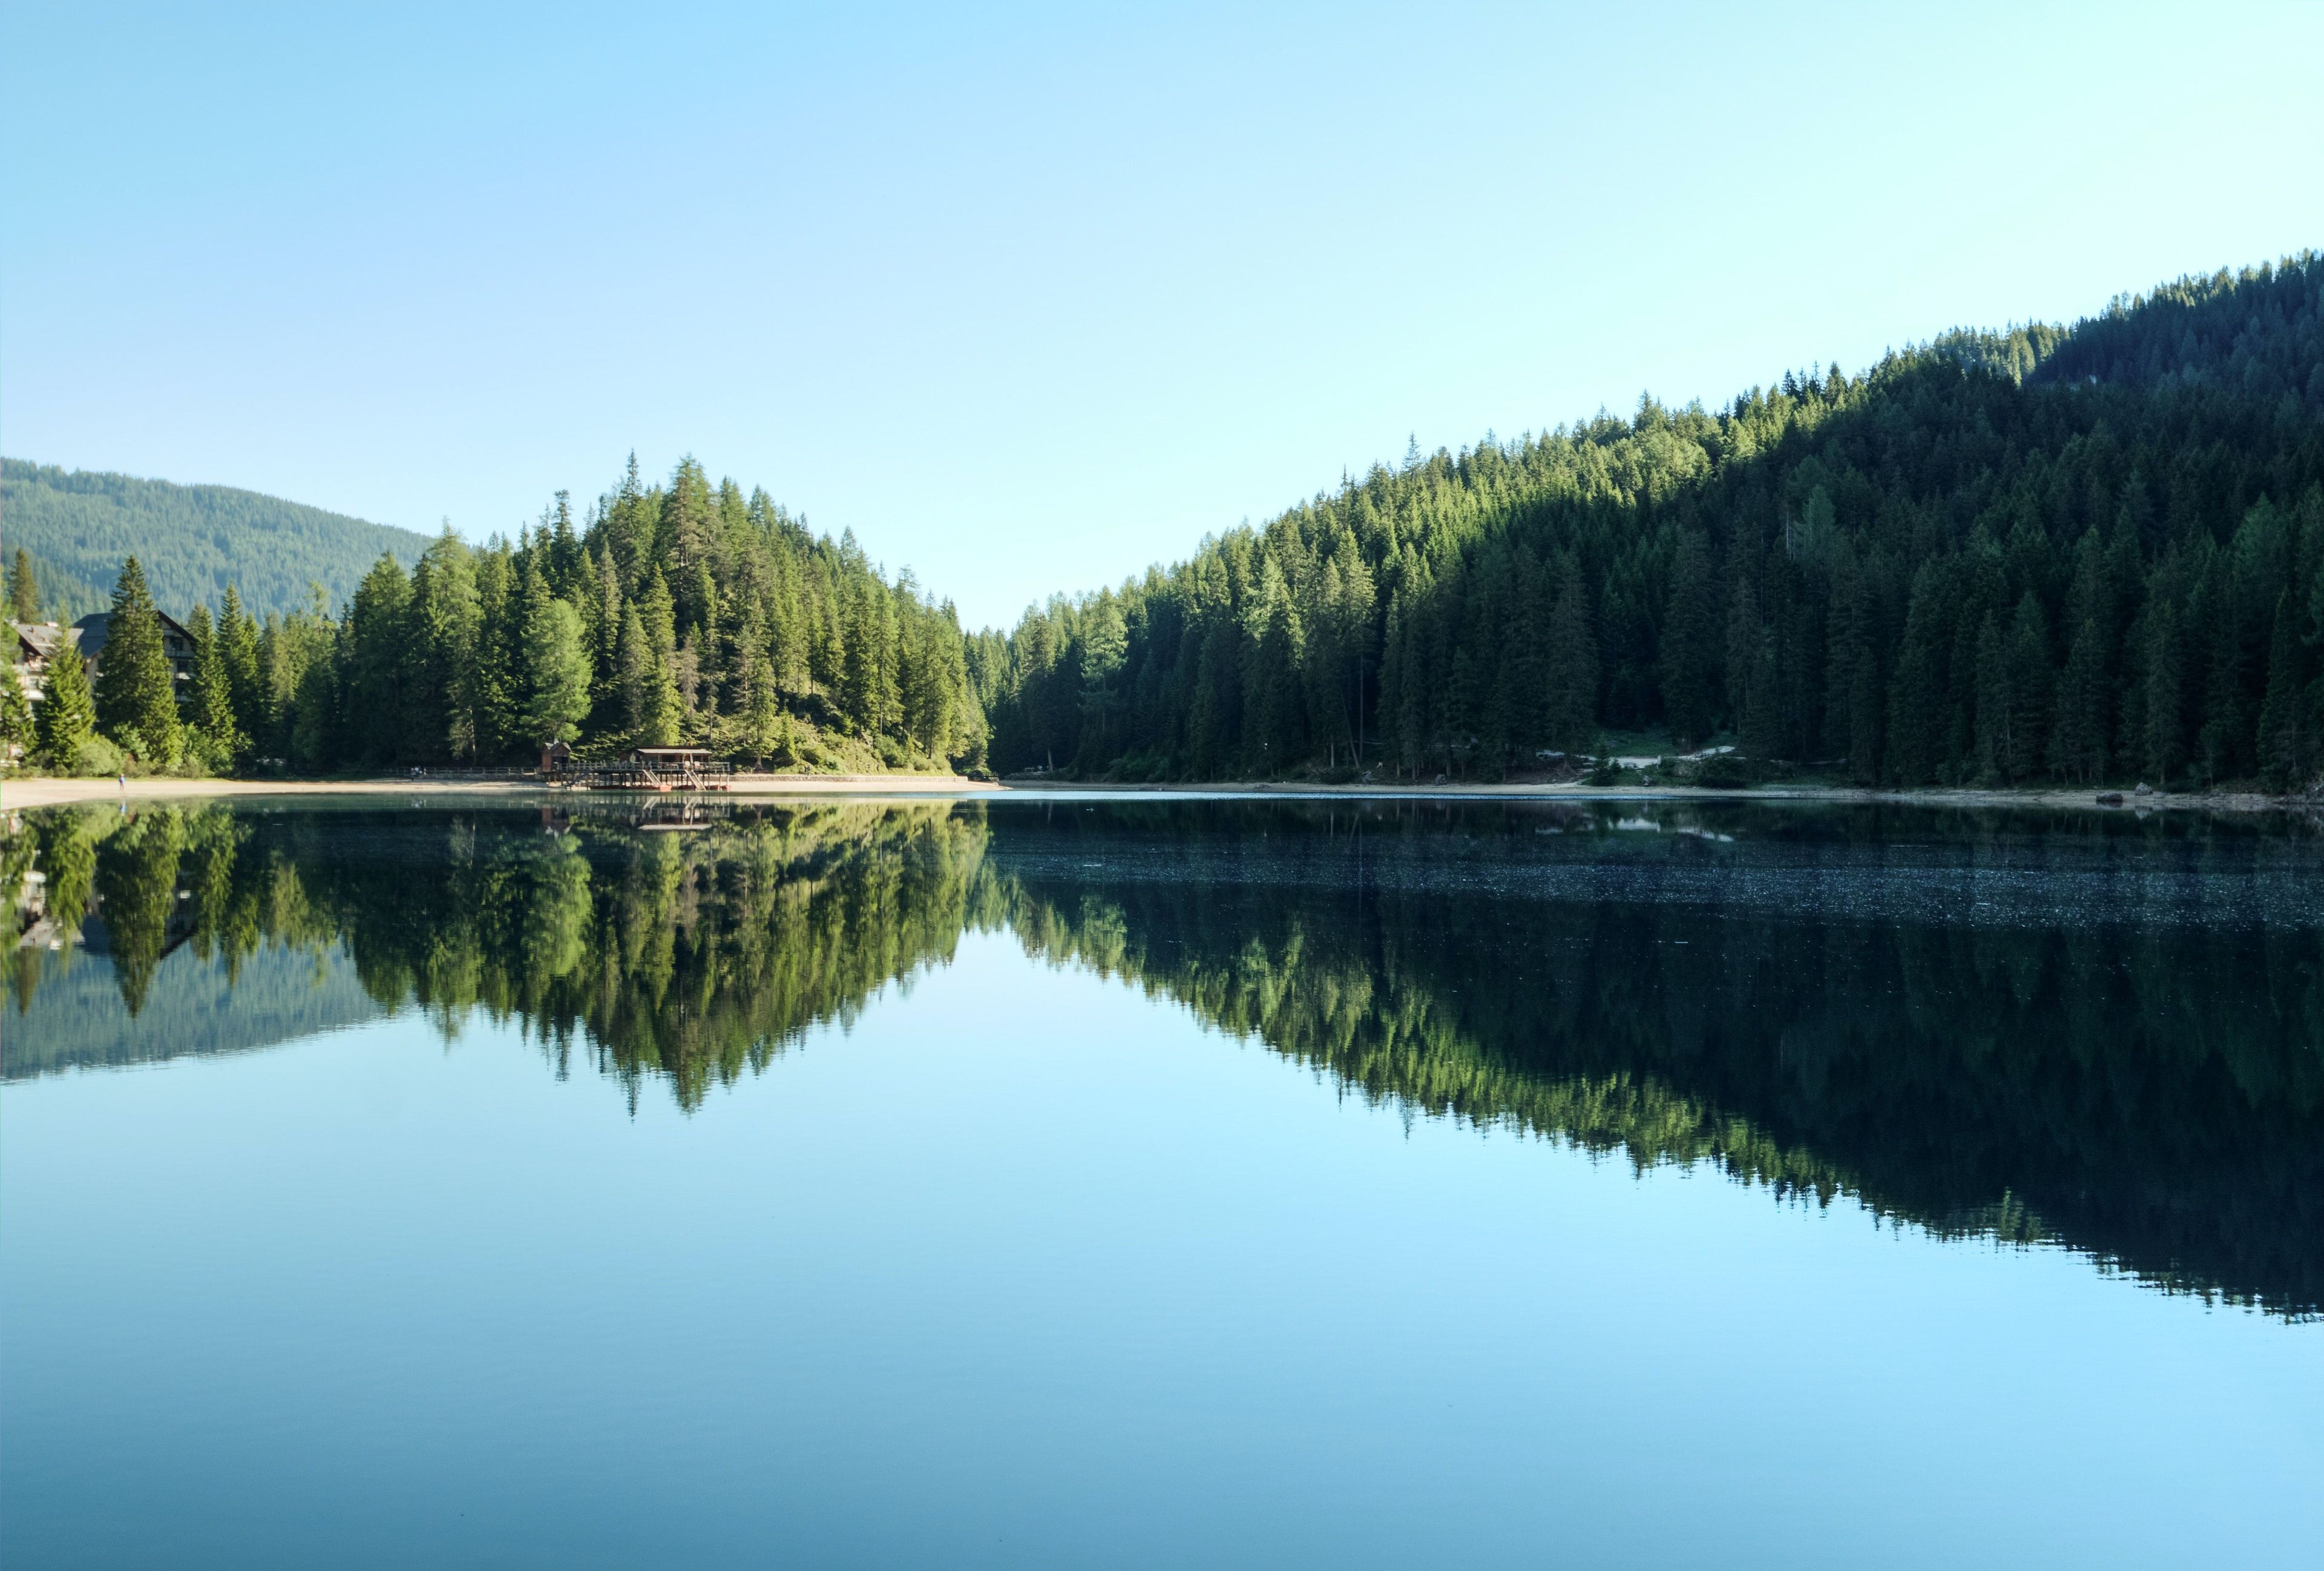 Evergreen trees on a lake